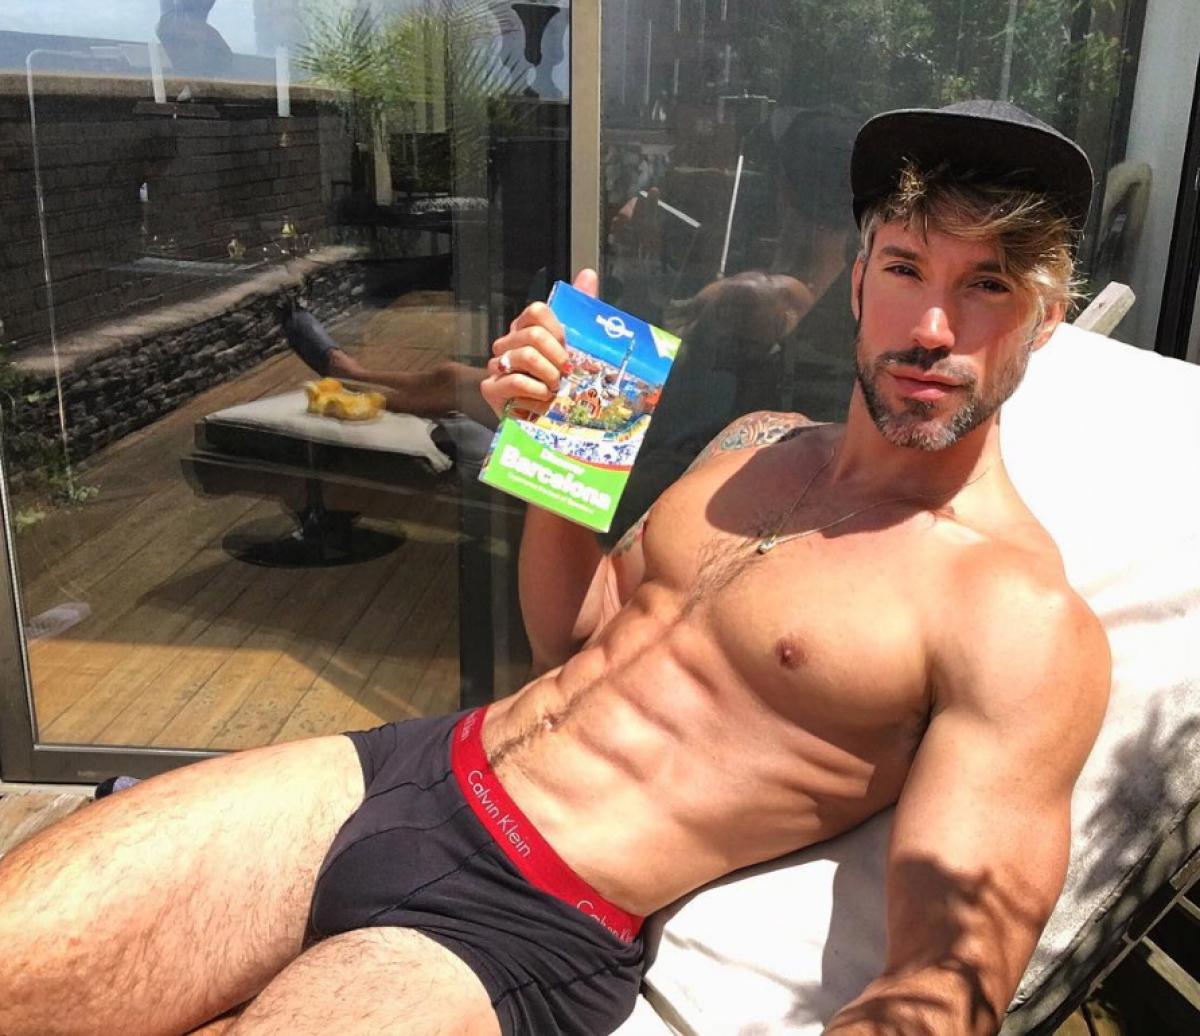 Gay bachelor robert sepulveda is not ashamed of his past as male escort